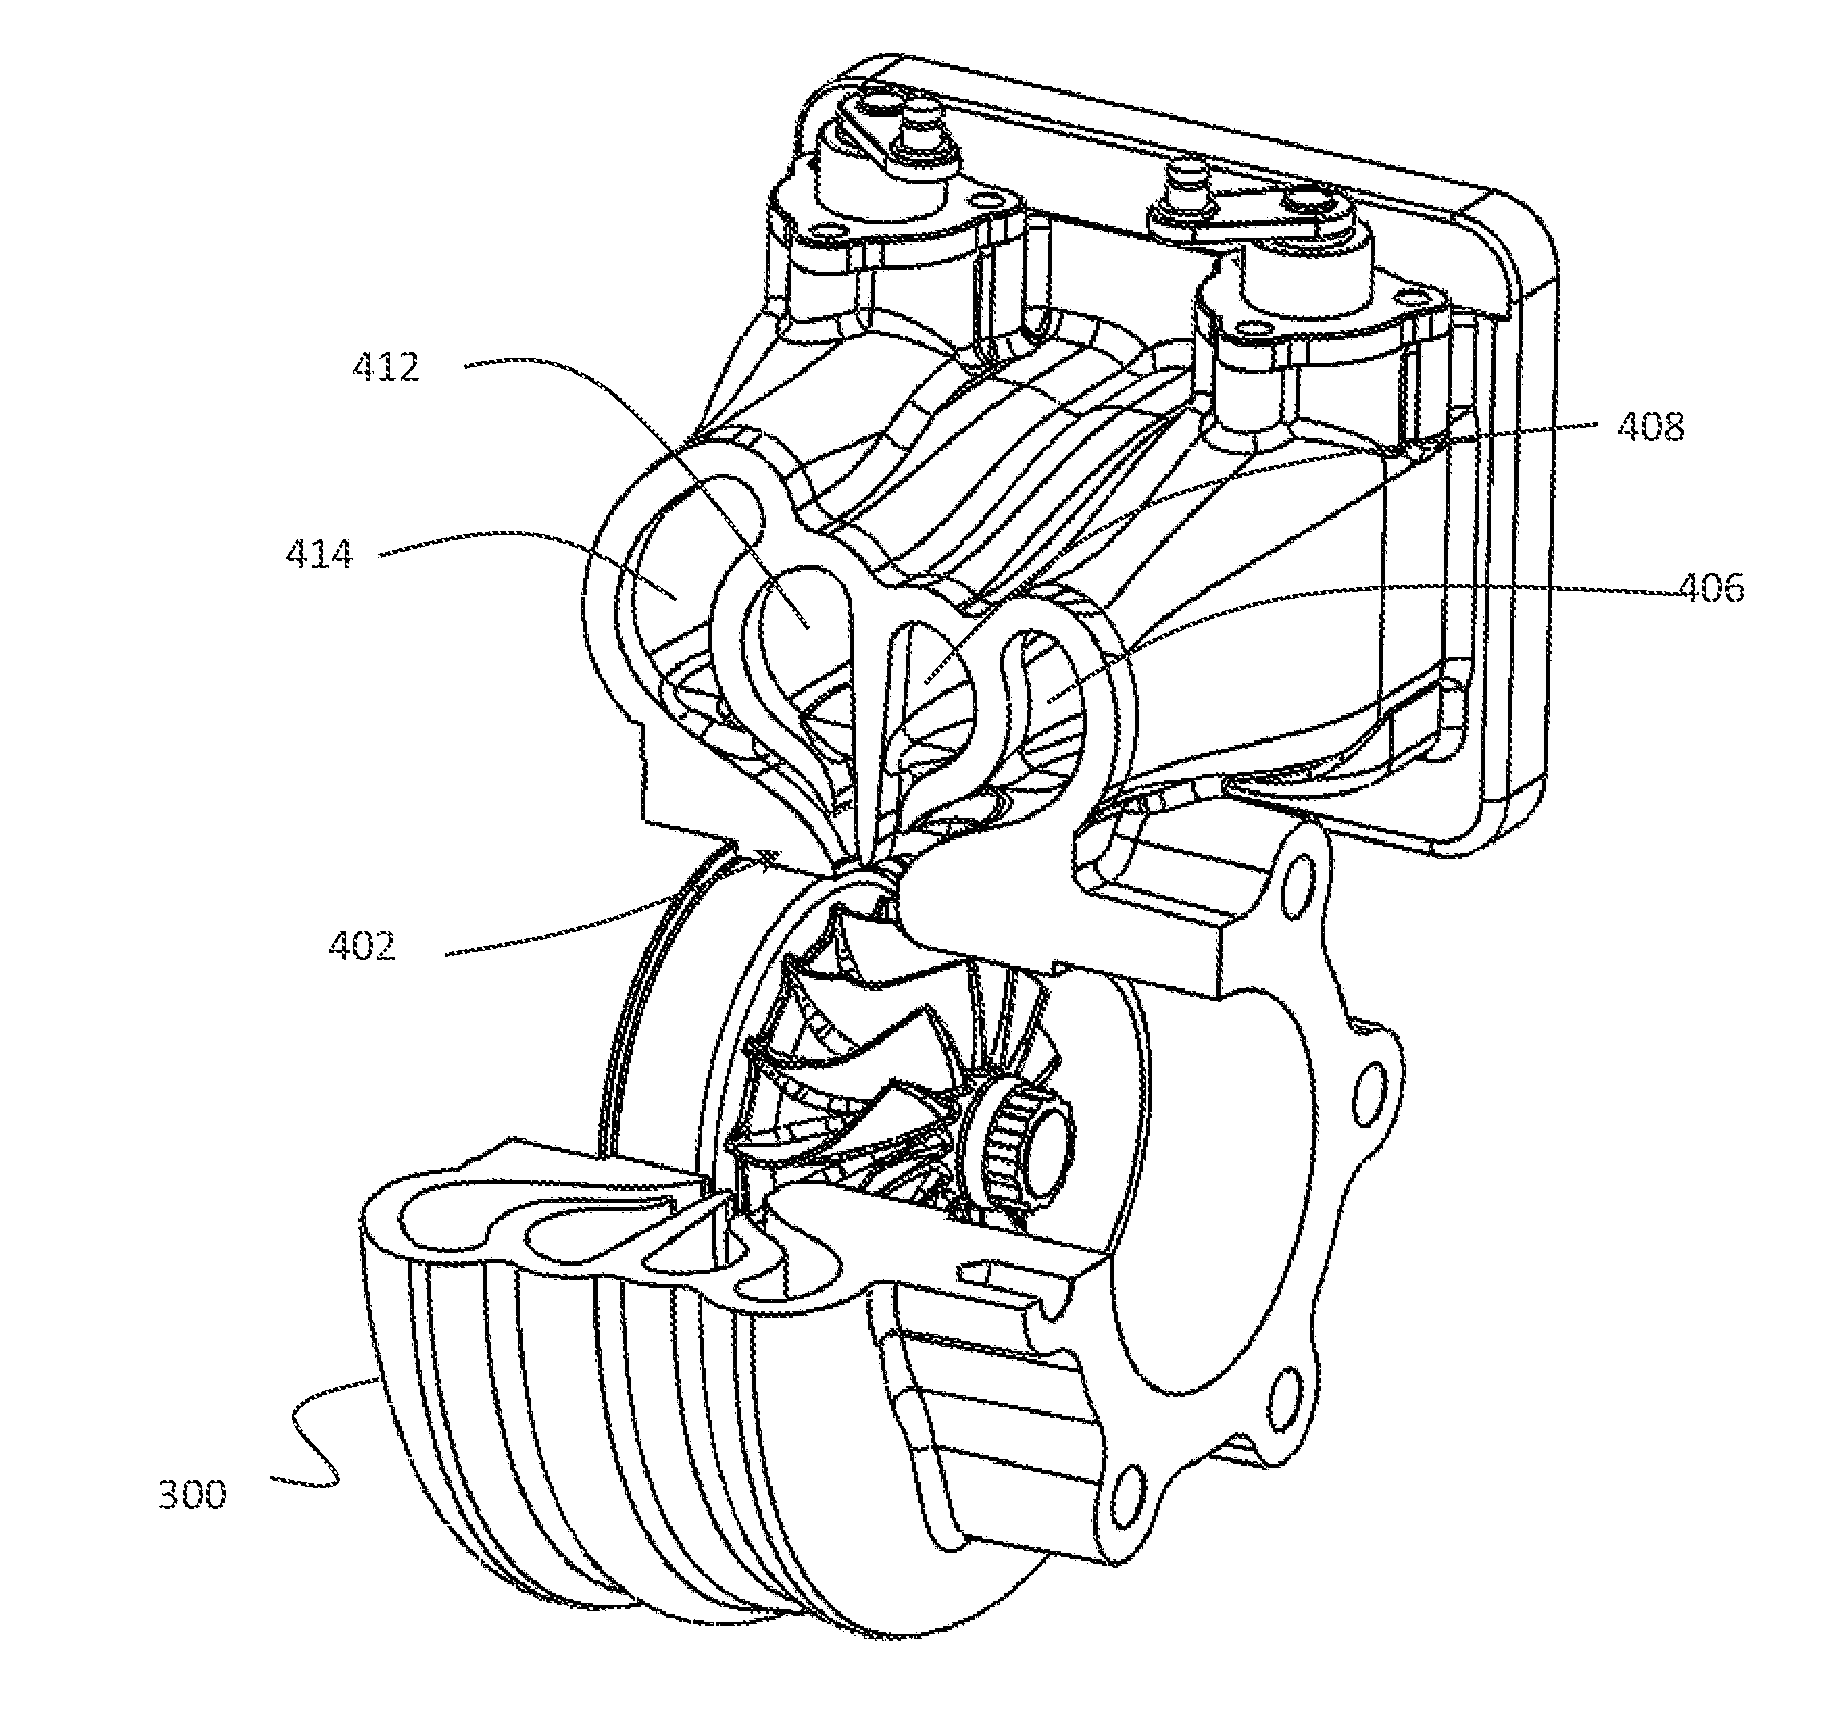 Quad layer passage variable geometry turbine for turbochargers in exhaust gas recirculation engines